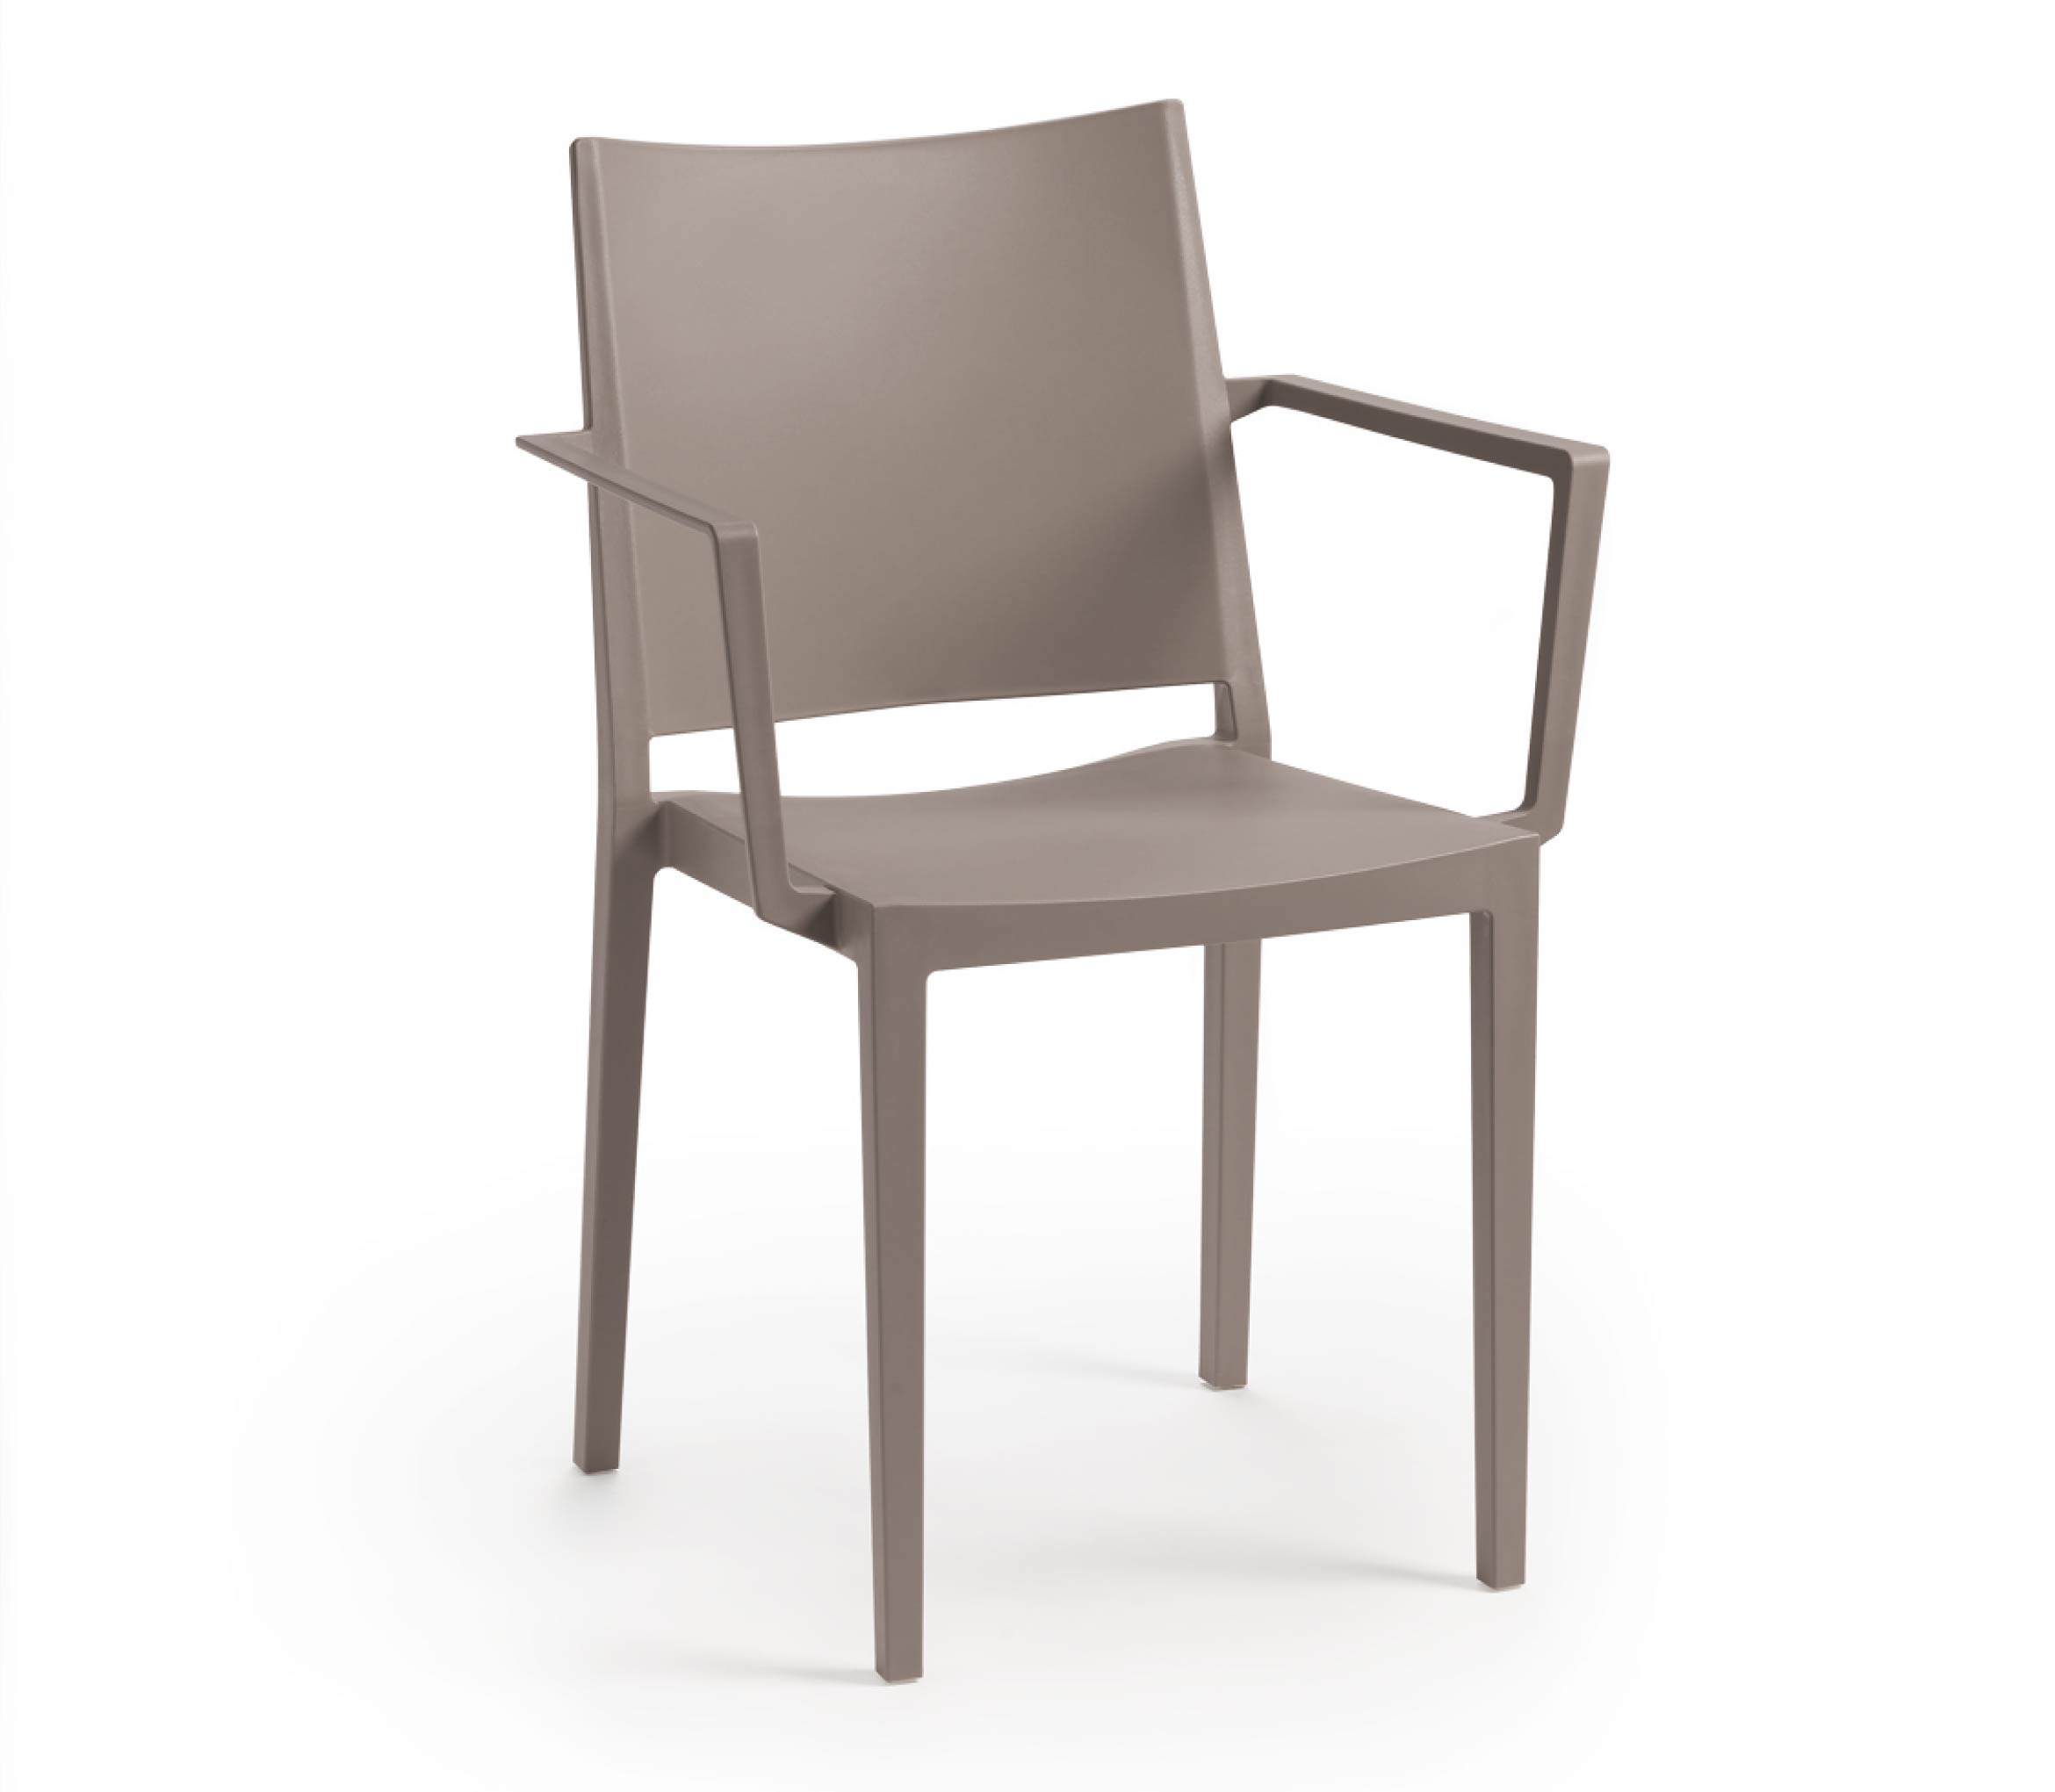 TENSAI_FURNITURE_MOSK_ARMCHAIR_GREY_COLOR_PLASTIC_white_background_802_001 - MOSK ARMCHAIR - cadeira